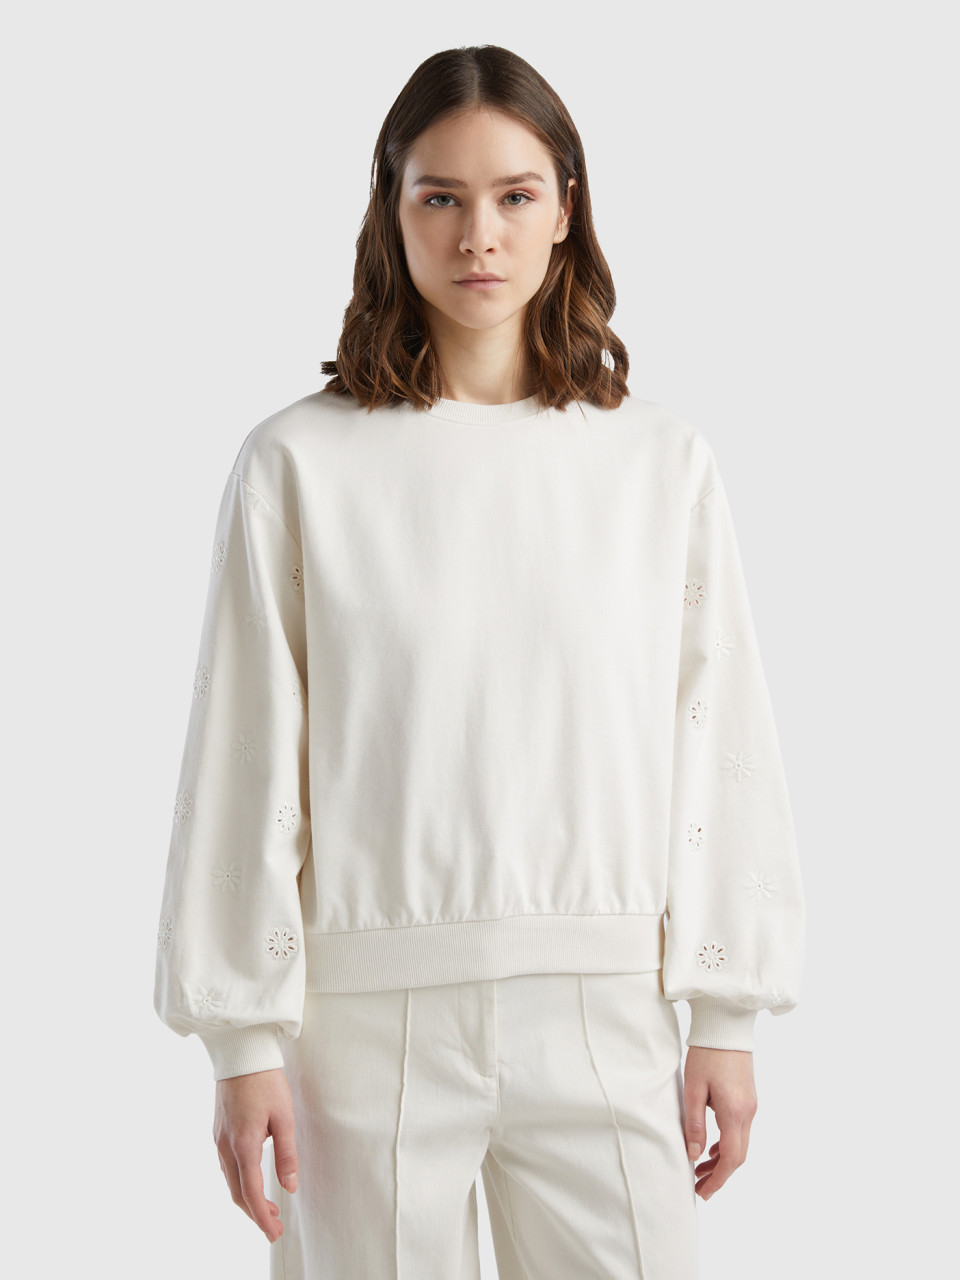 Benetton, Sweatshirt With Floral Embroidery, Creamy White, Women